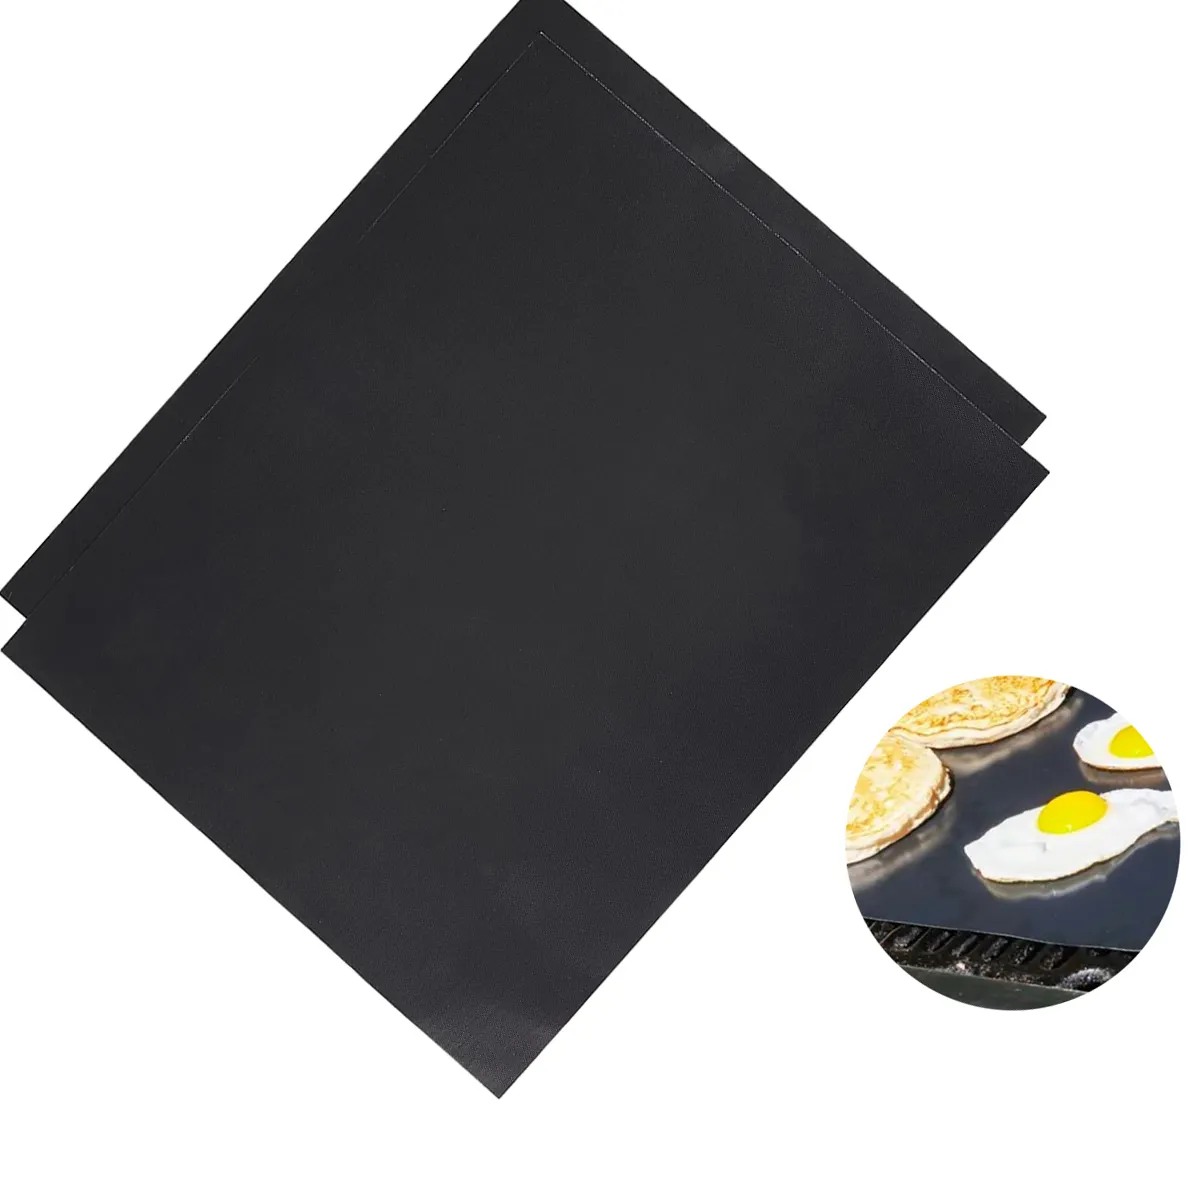 Customized Nonstick PTFE Fiberglass BBQ Cooking Accessories Reusable Oven Liners BBQ Grill Mat for Outdoor Grill